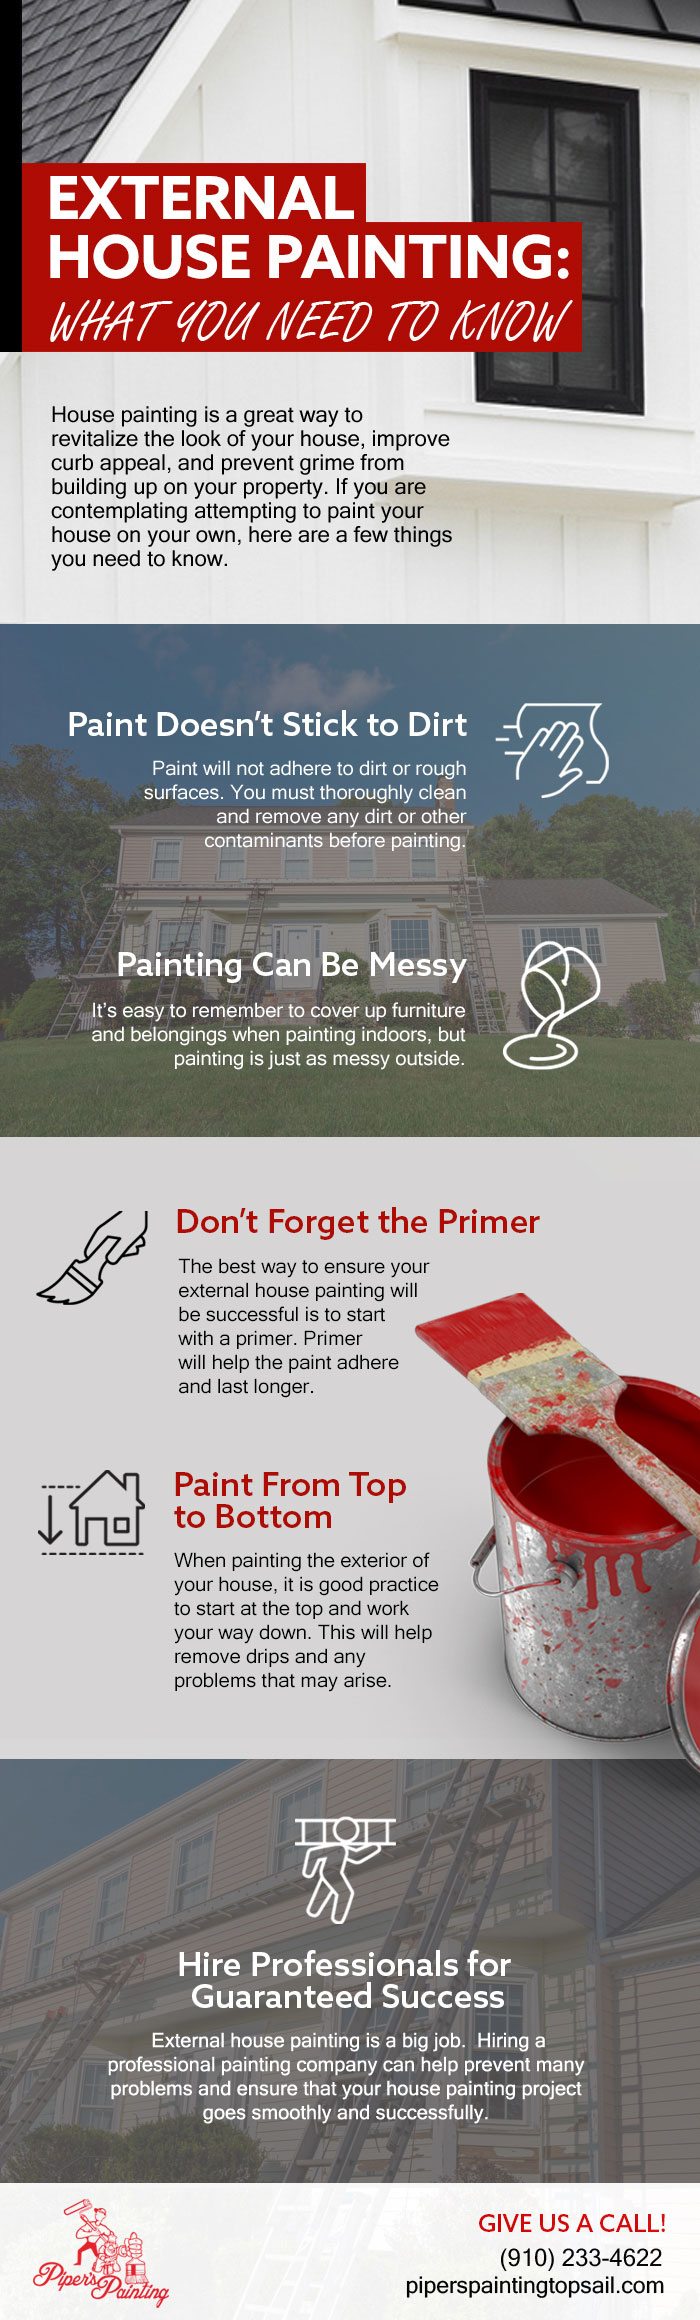 External House Painting: What You Need to Know